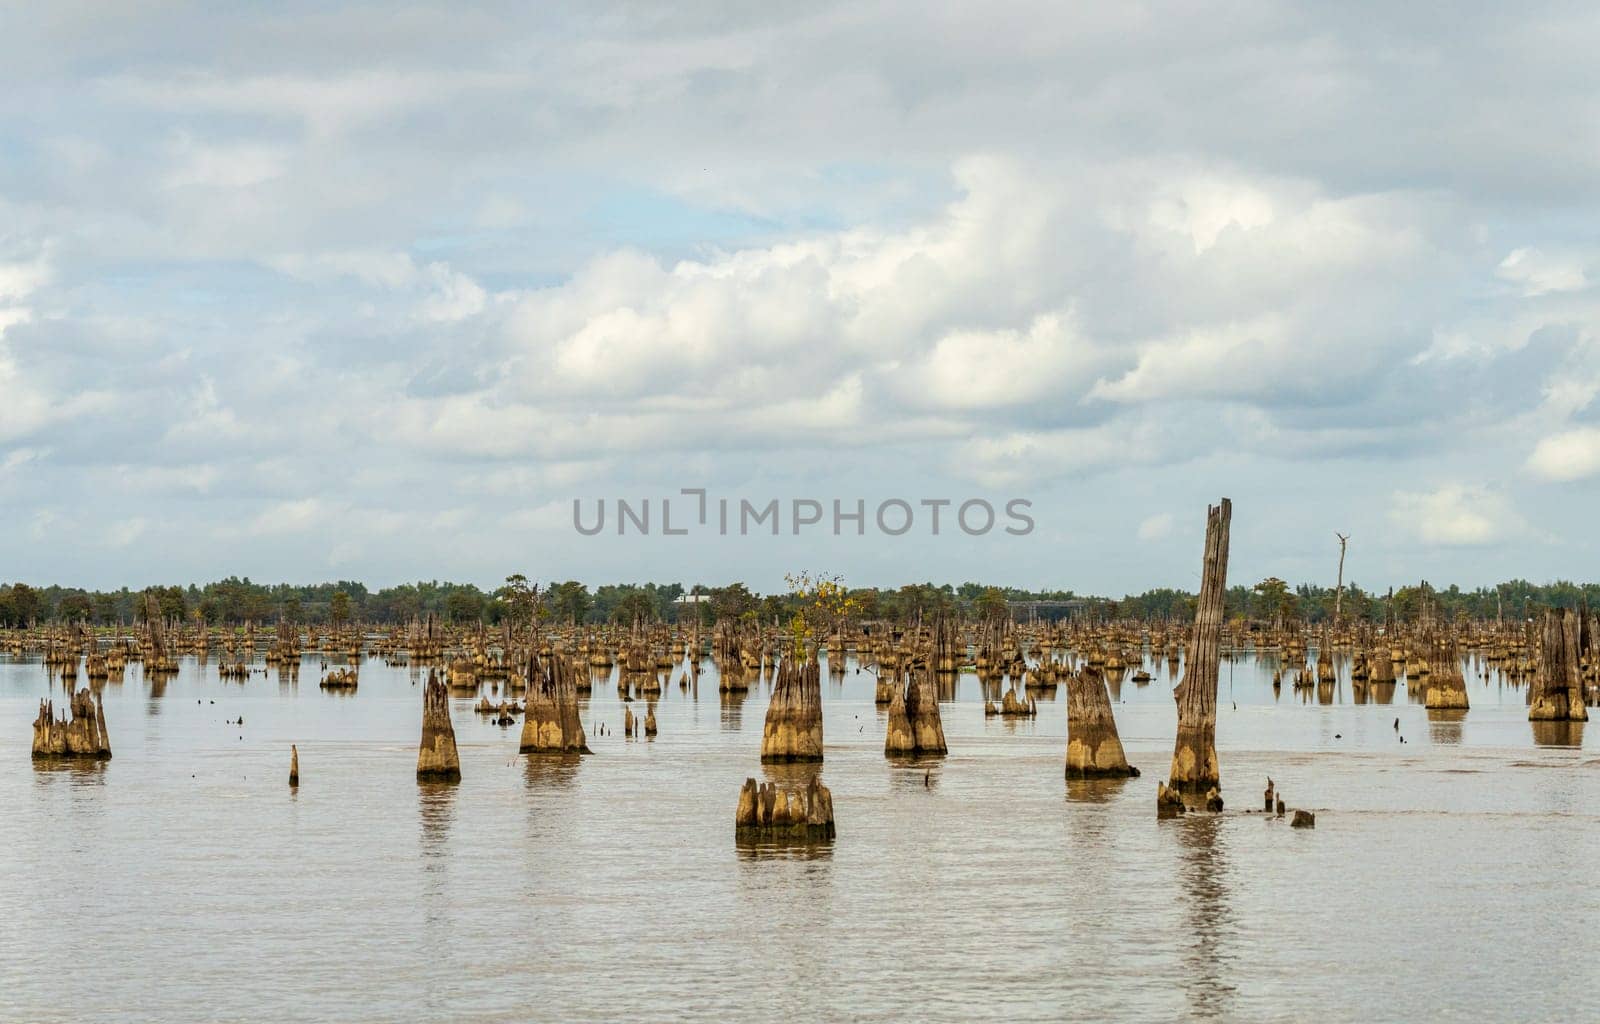 Stumps of bald cypress trees rise out of water in Atchafalaya basin by steheap